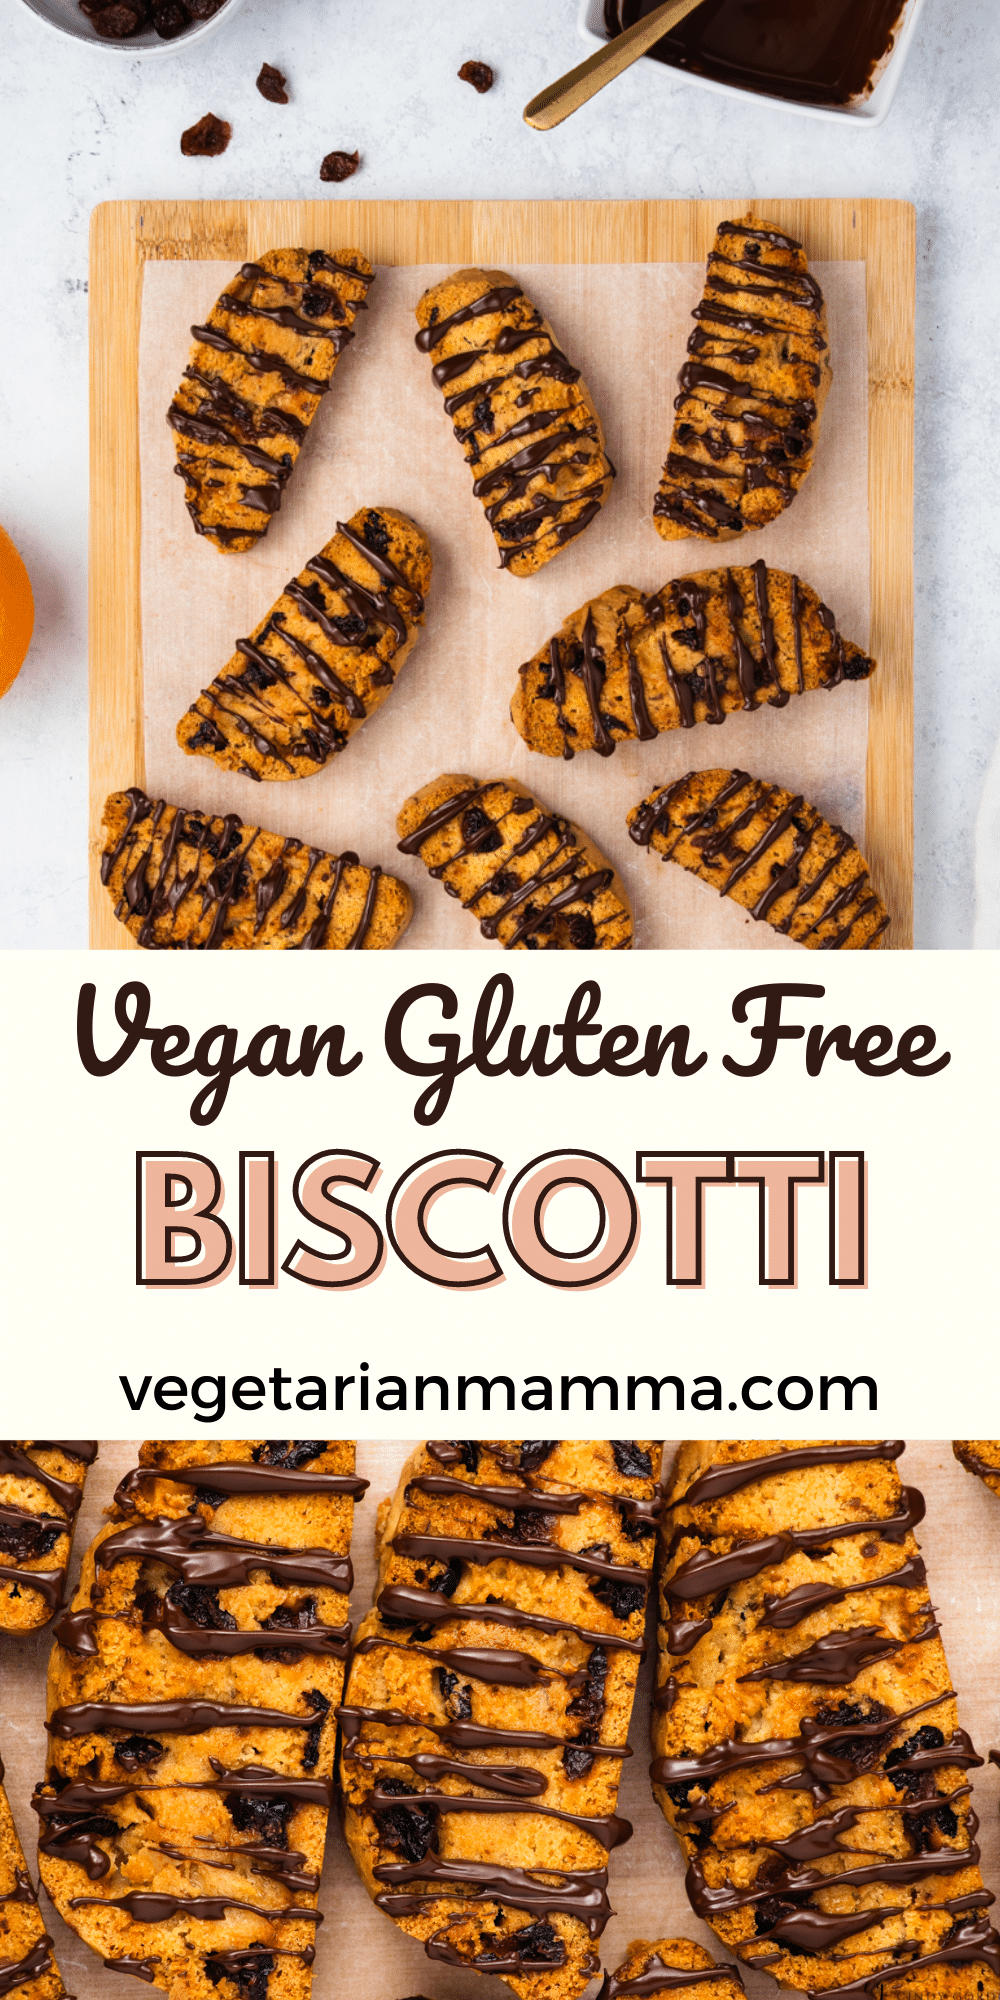 These Vegan Biscotti are crunchy, chocolatey, and perfect for the holidays! Add orange zest and dried cranberries to the gluten-free cookies for a festive breakfast treat or afternoon snack.